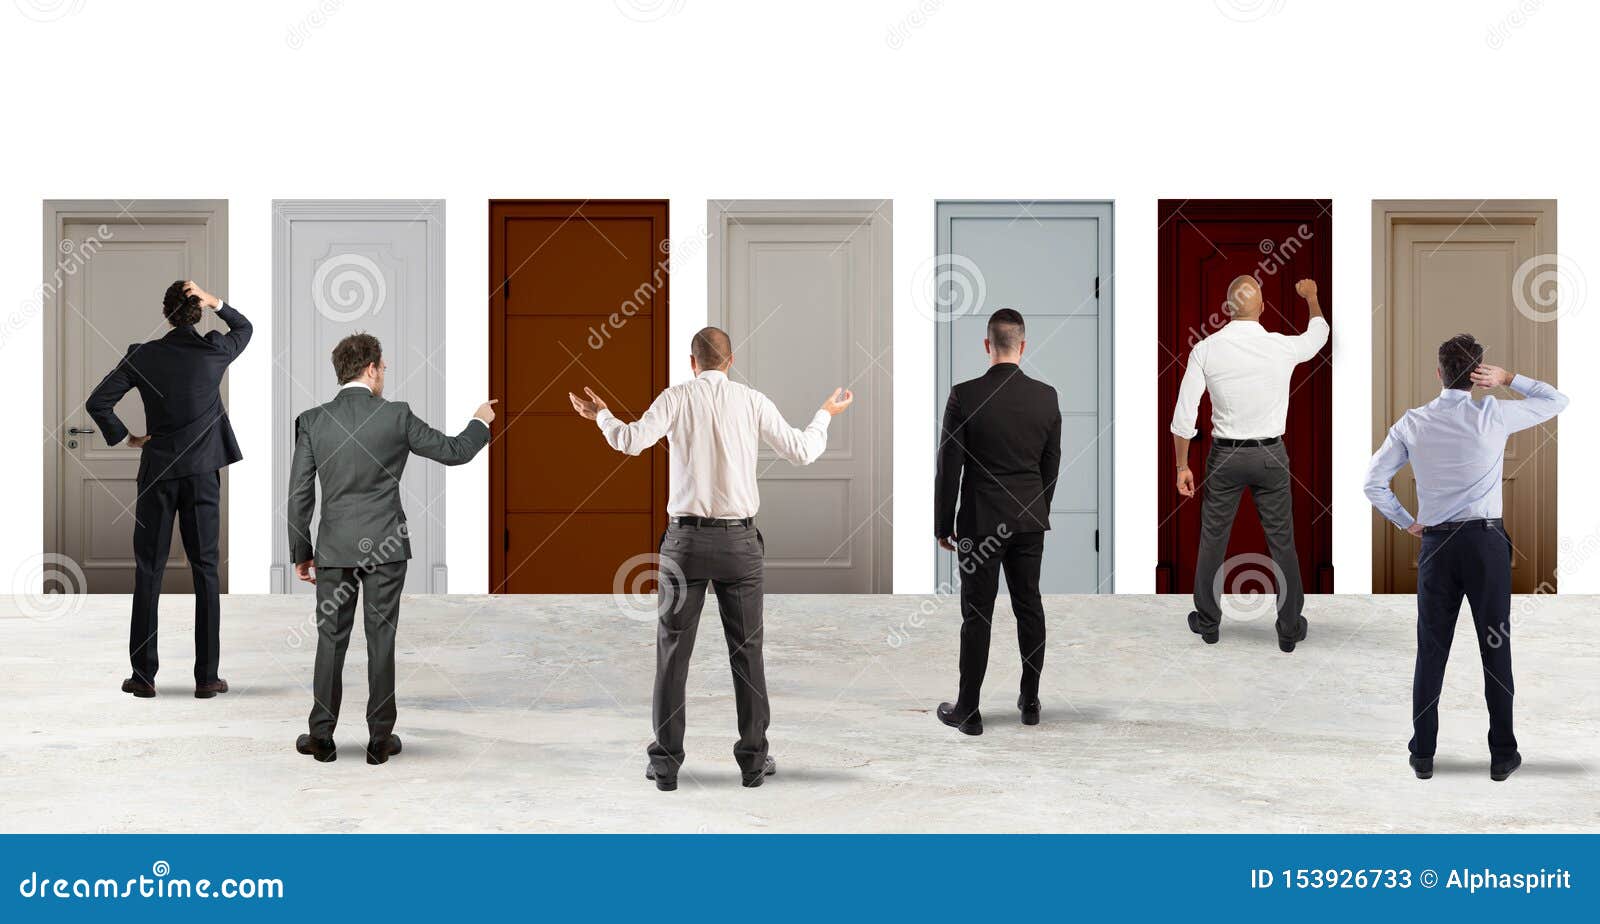 business people looking to select the right door. concept of confusion and competition